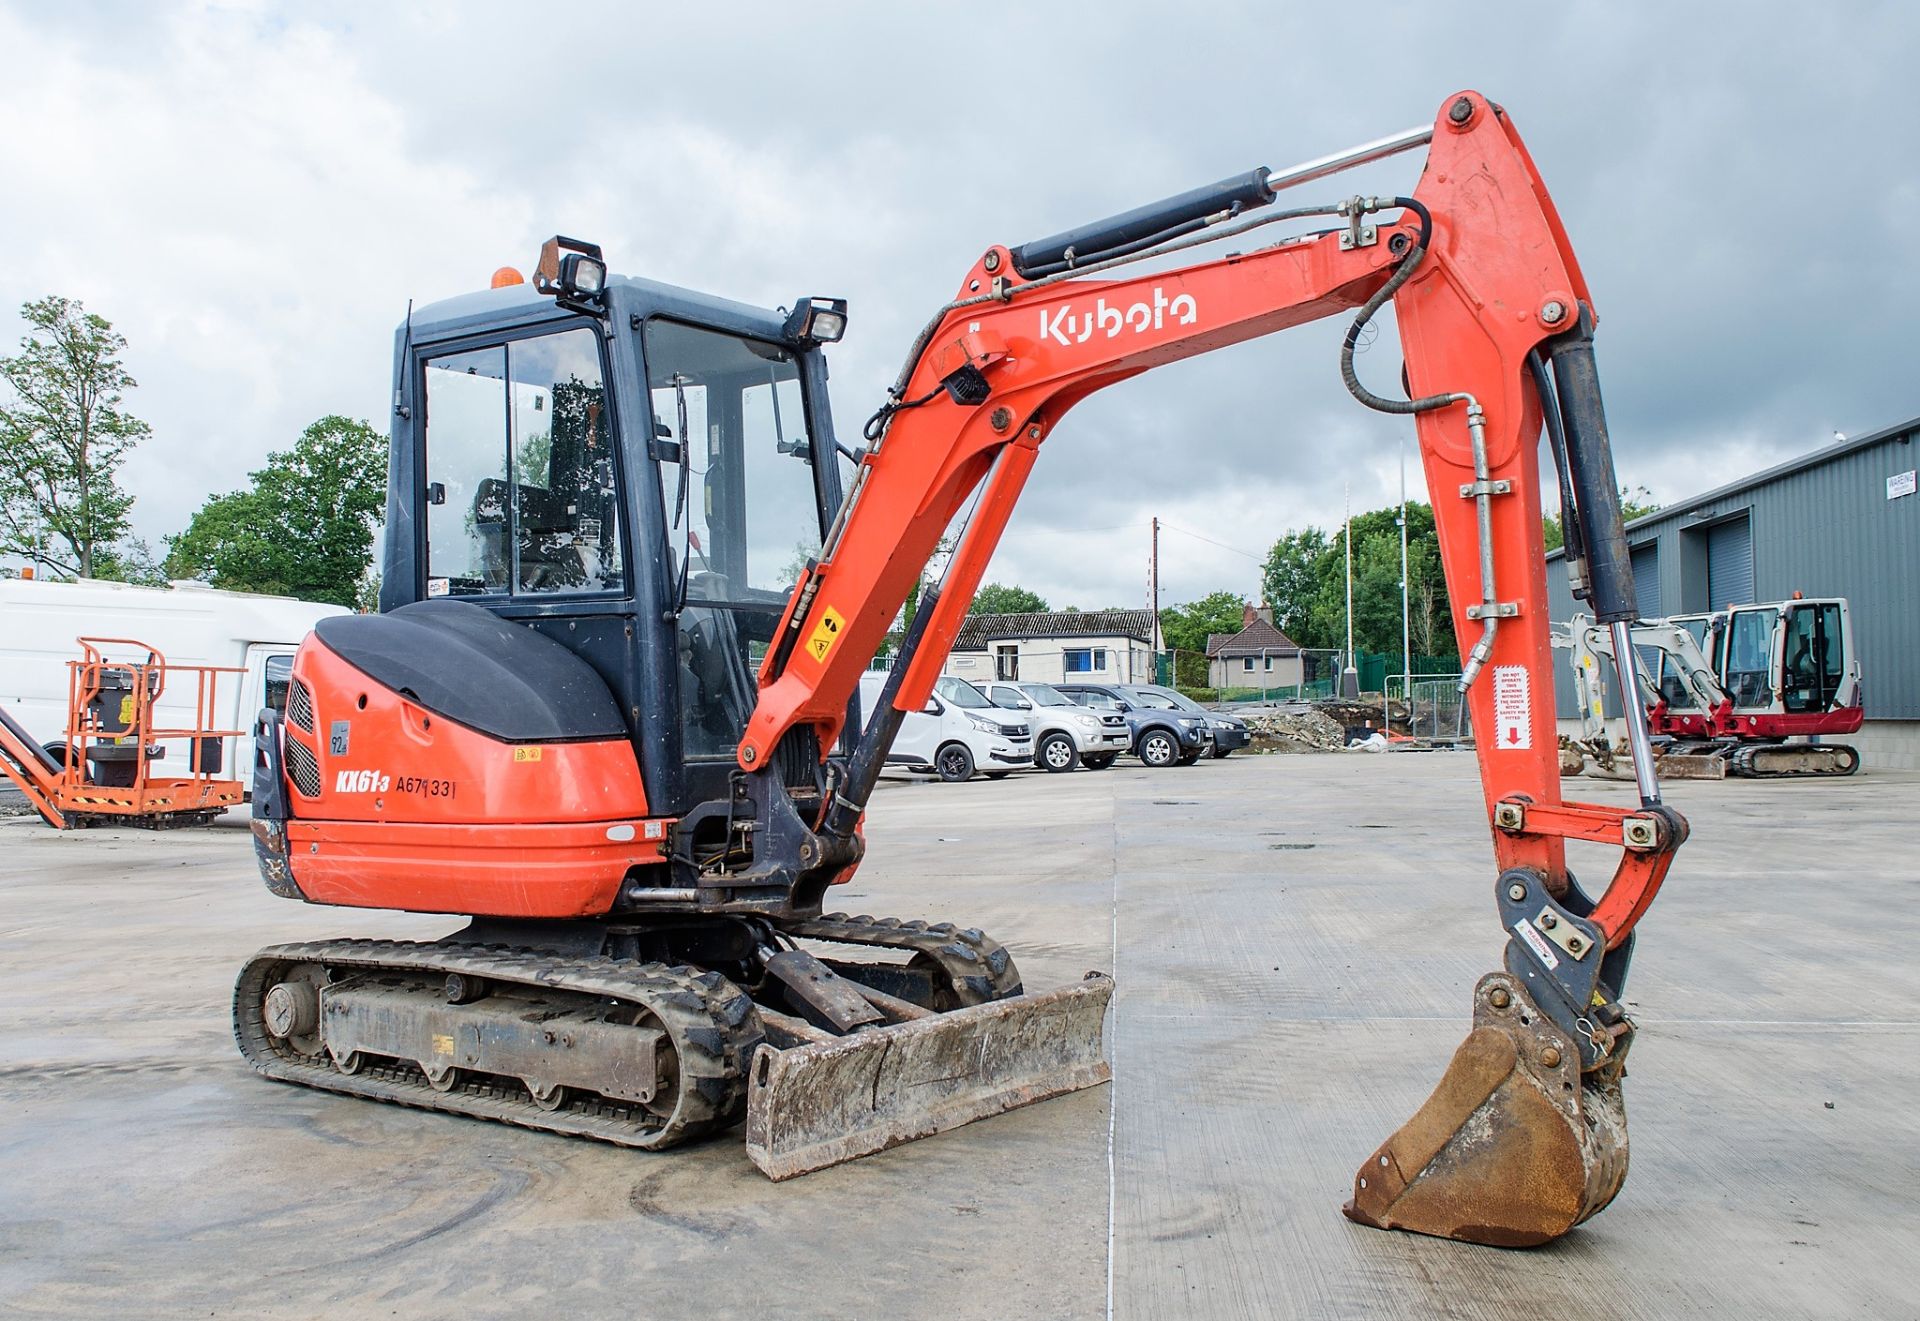 Kubota KX61-3 2.6 tonne rubber tracked excavator Year: 2015 S/N: 82259 Recorded Hours: 2075 blade, - Image 2 of 20